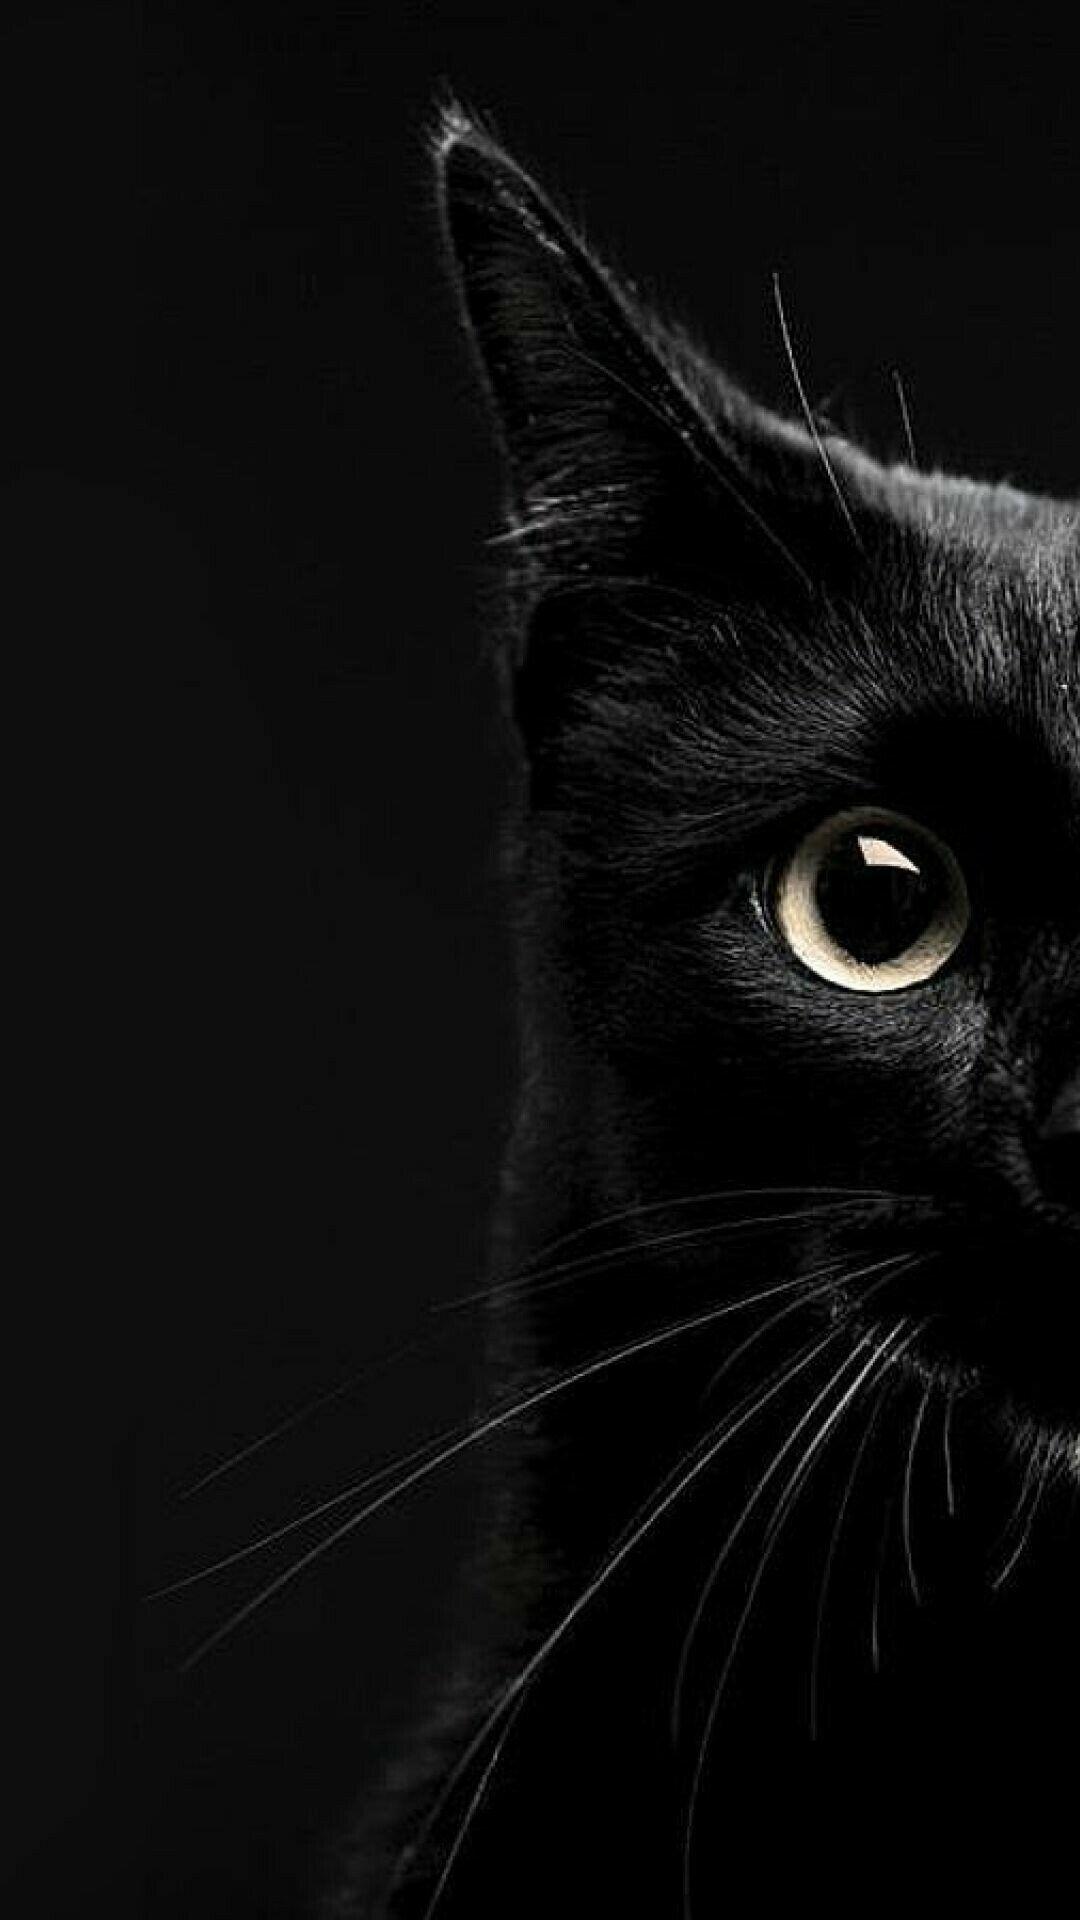 20 Greatest wallpaper aesthetic black cat You Can Download It Free Of ...